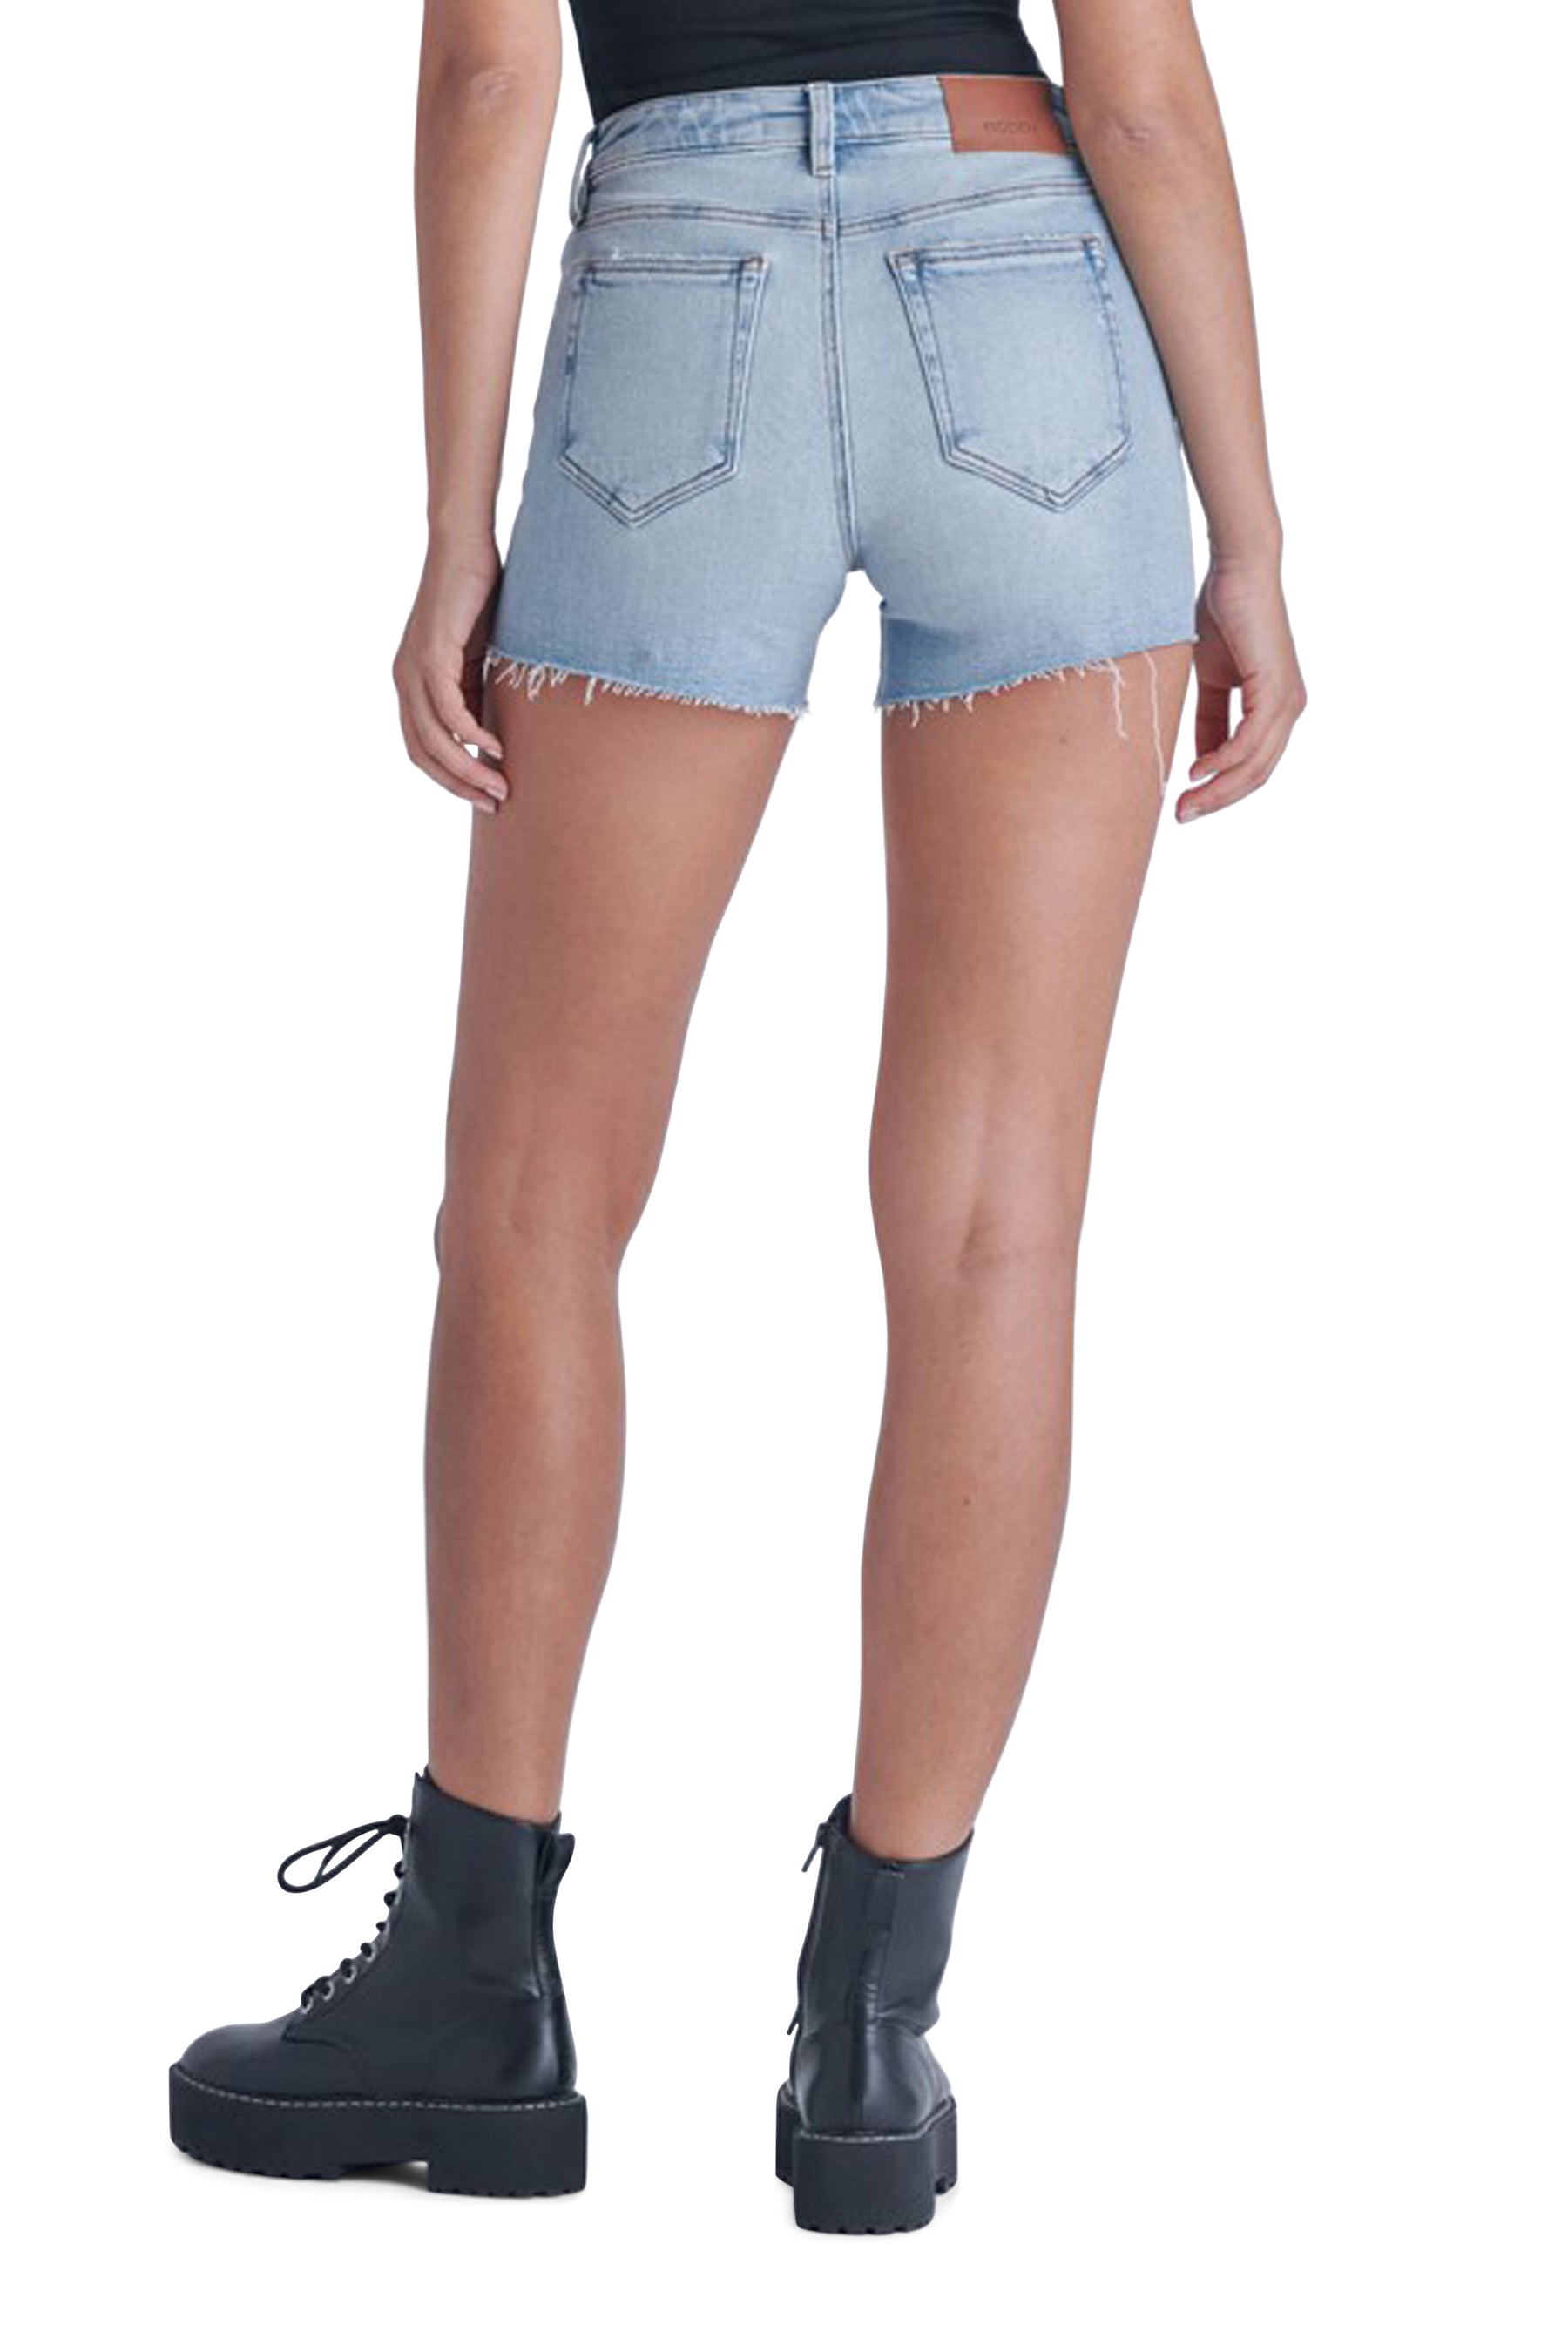 The Kenzie Mid Rise Short